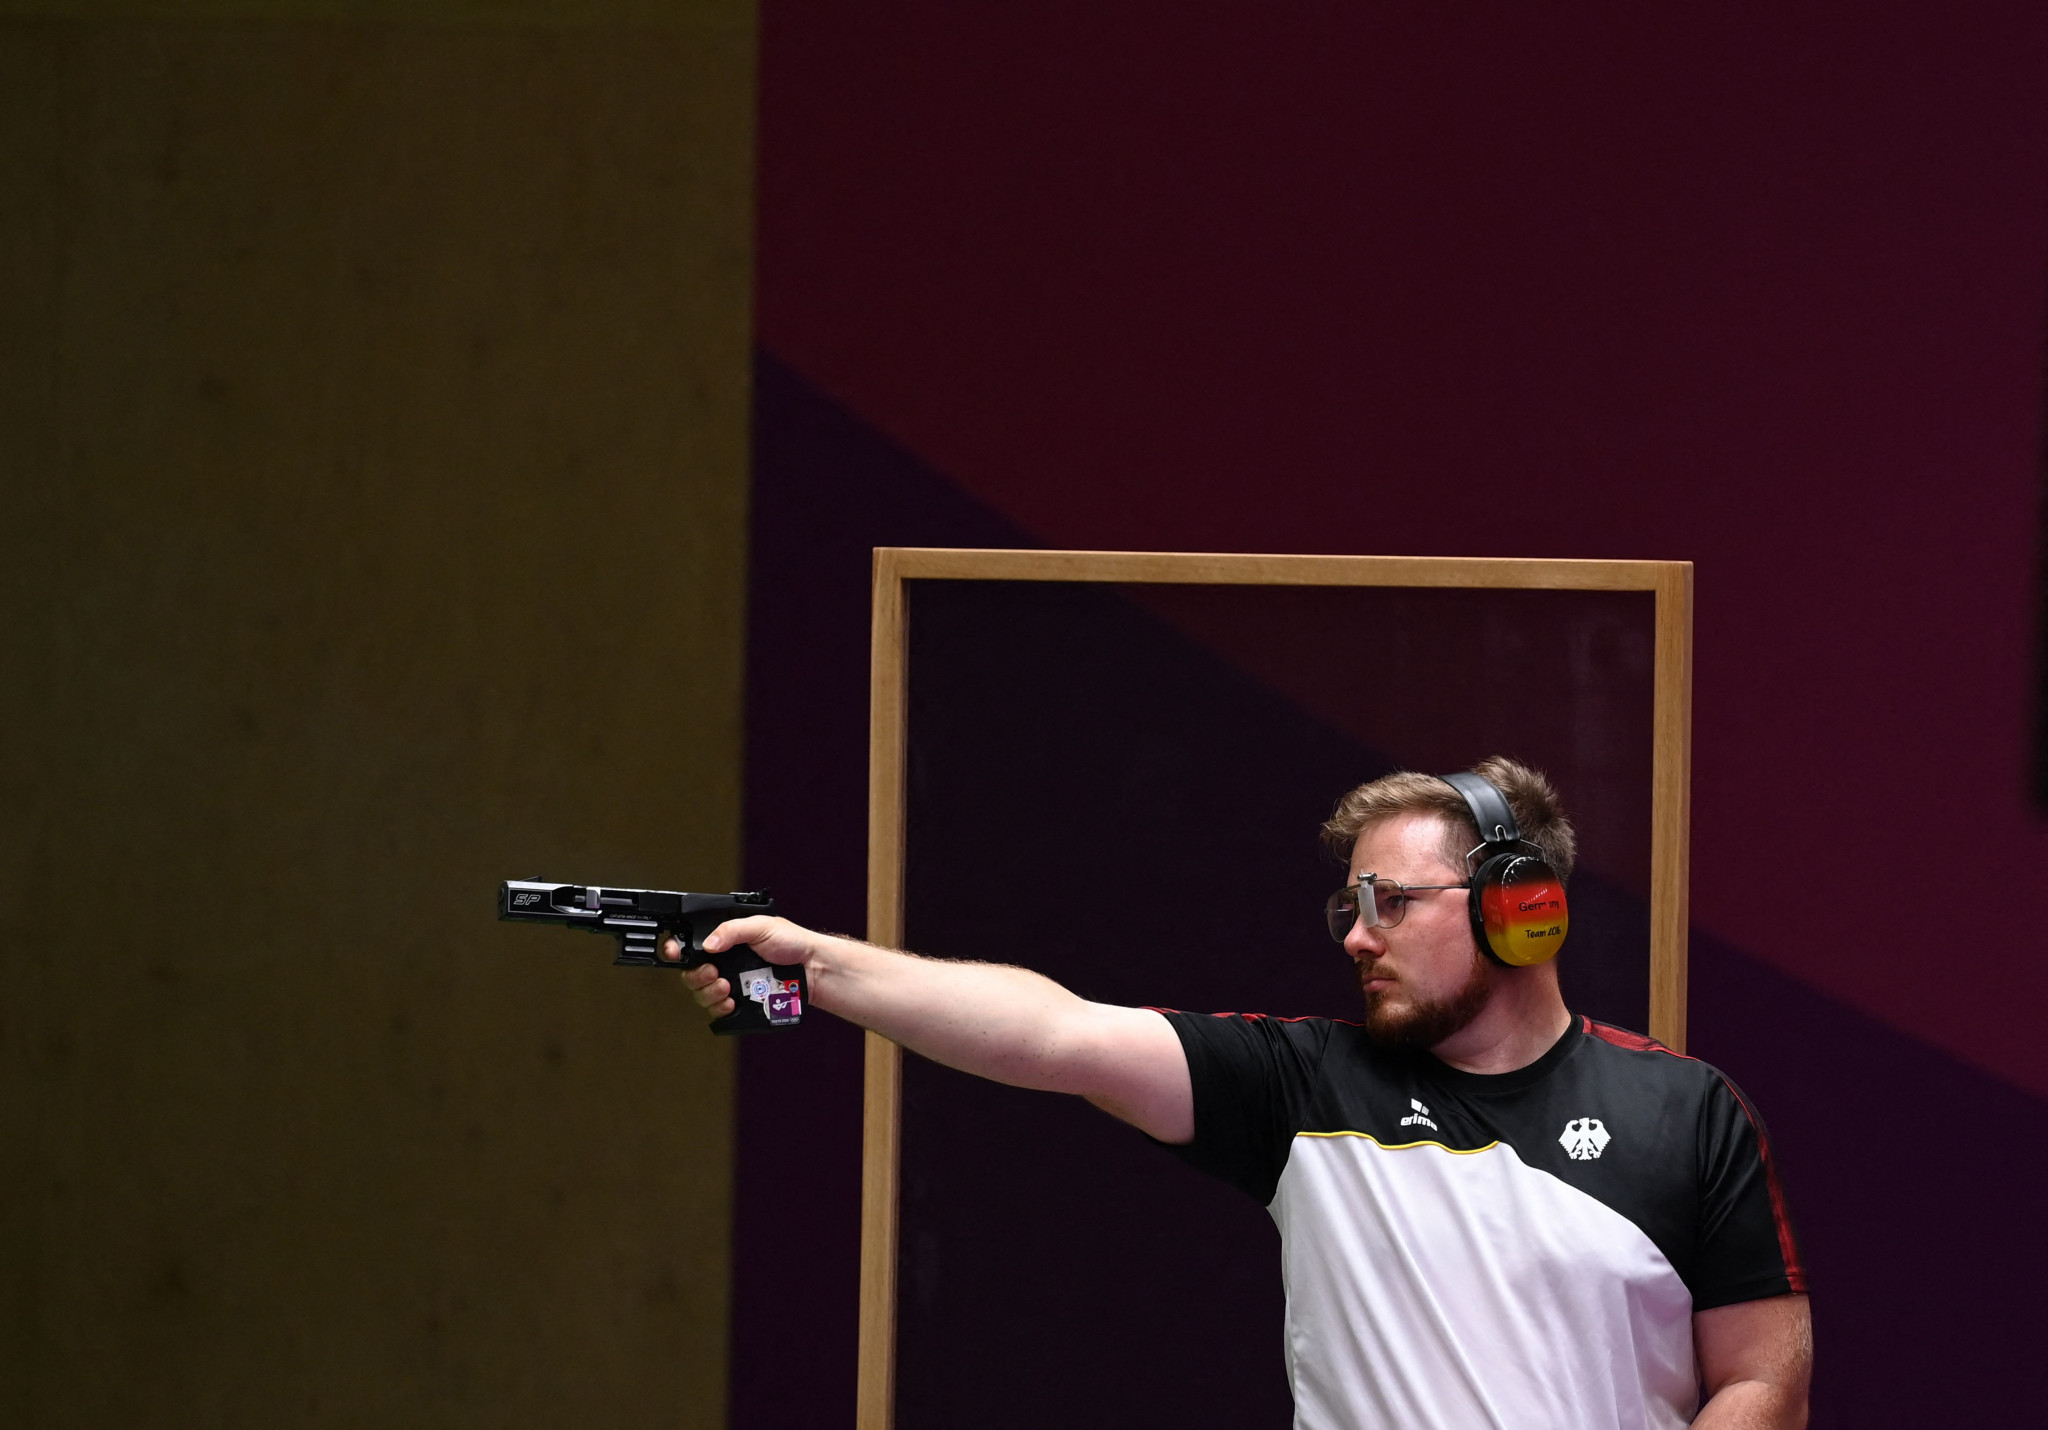 Oliver Geis was part of Germany's gold medal winning 25m rapid fire pistol team at the ISSF World Cup in Cairo ©Getty Images